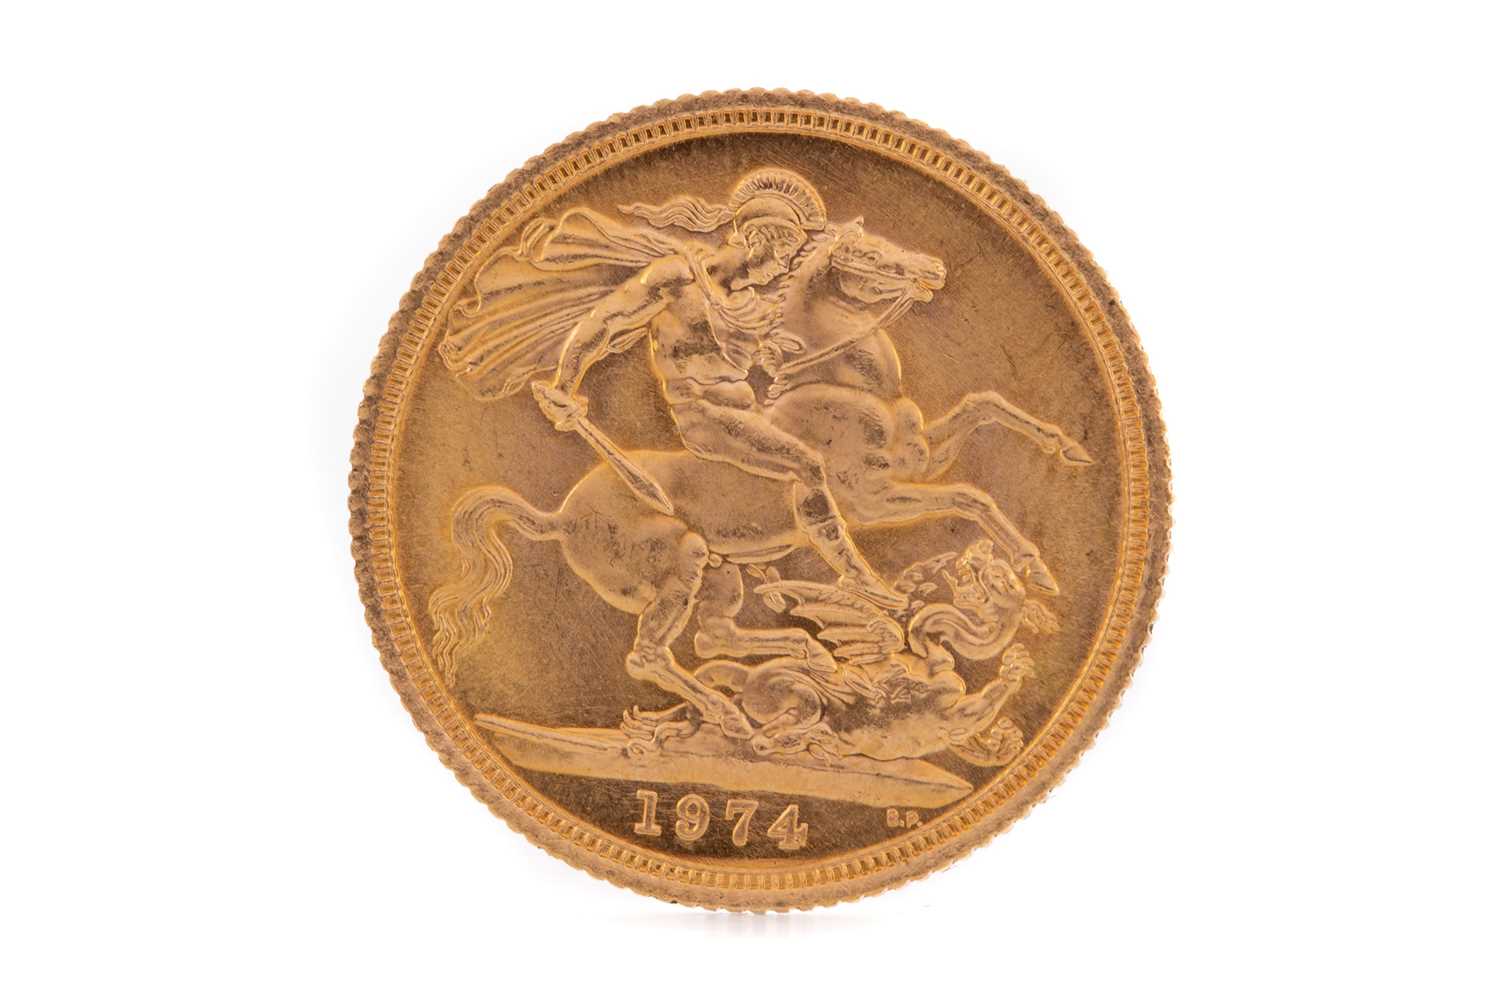 Lot 98 - AN ELIZABETH II GOLD SOVEREIGN DATED 1974